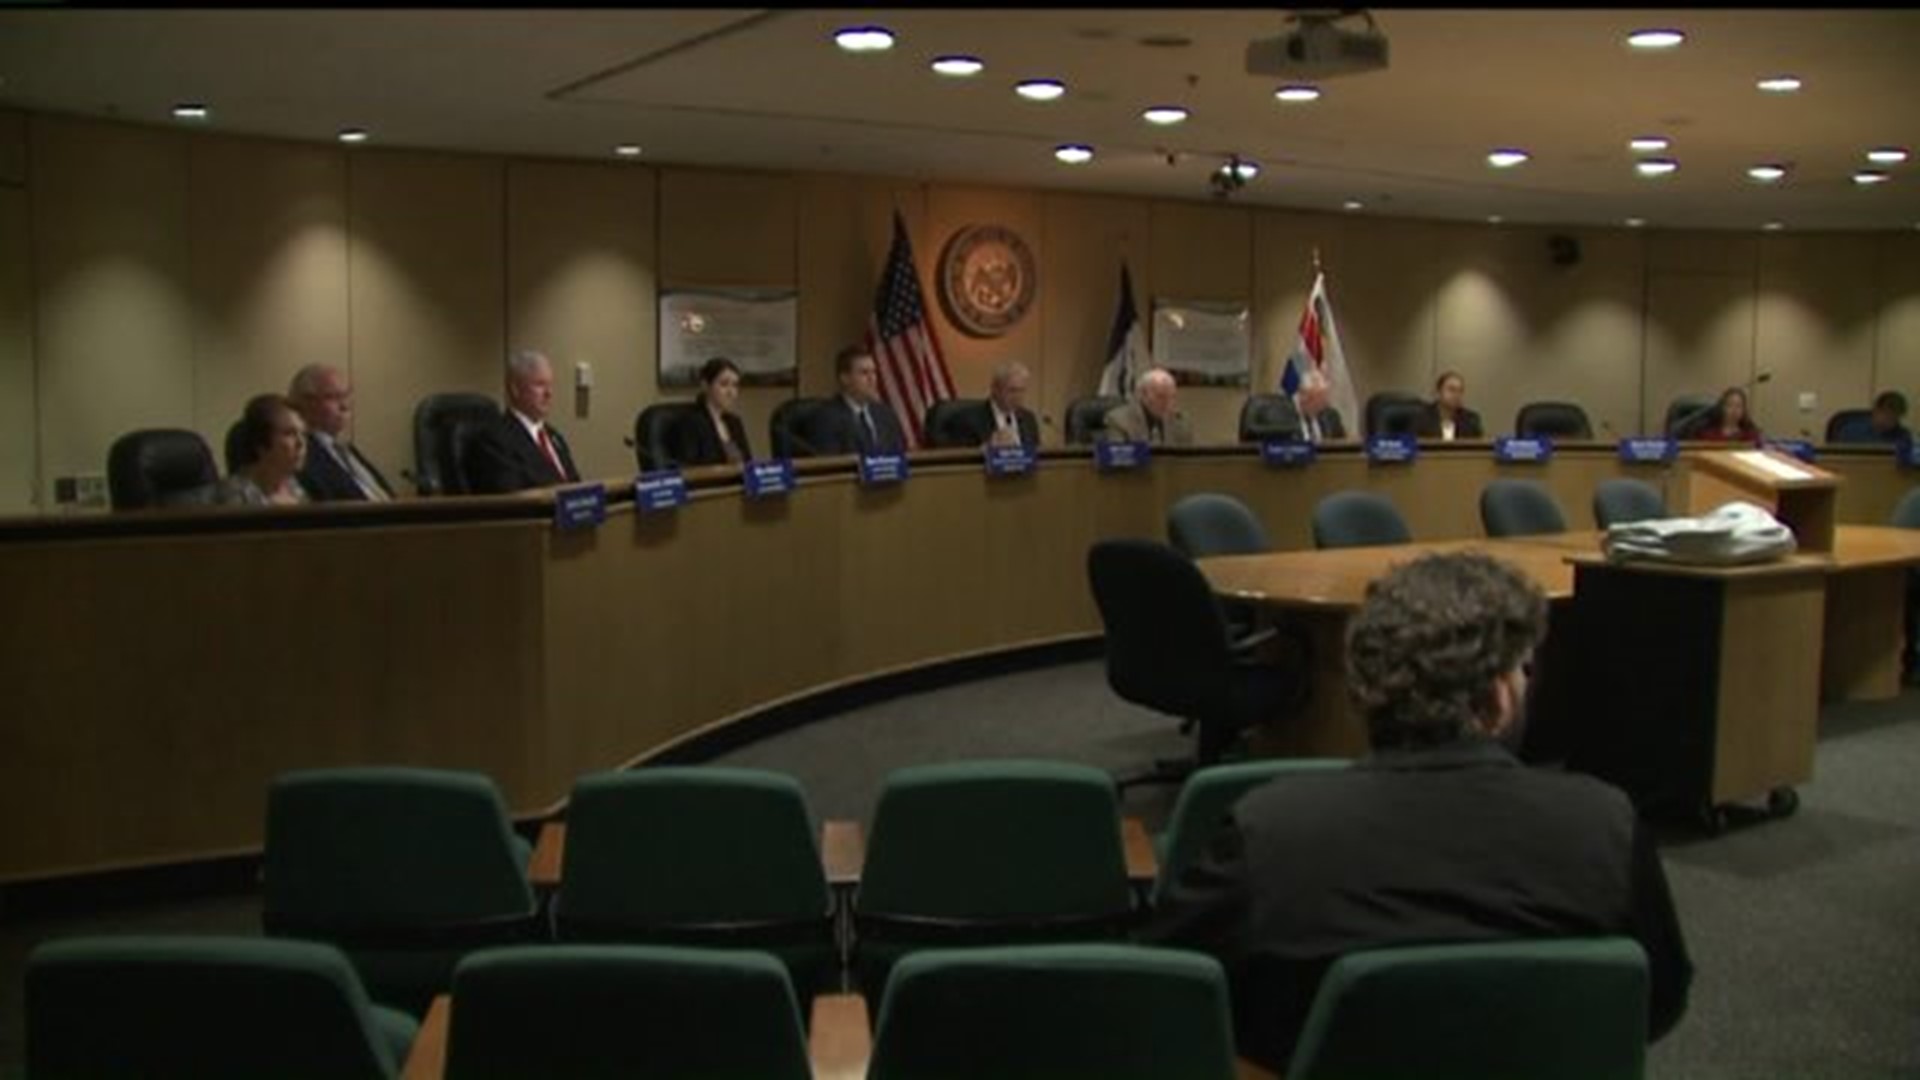 Davenport city council gets involved in state funding dispute